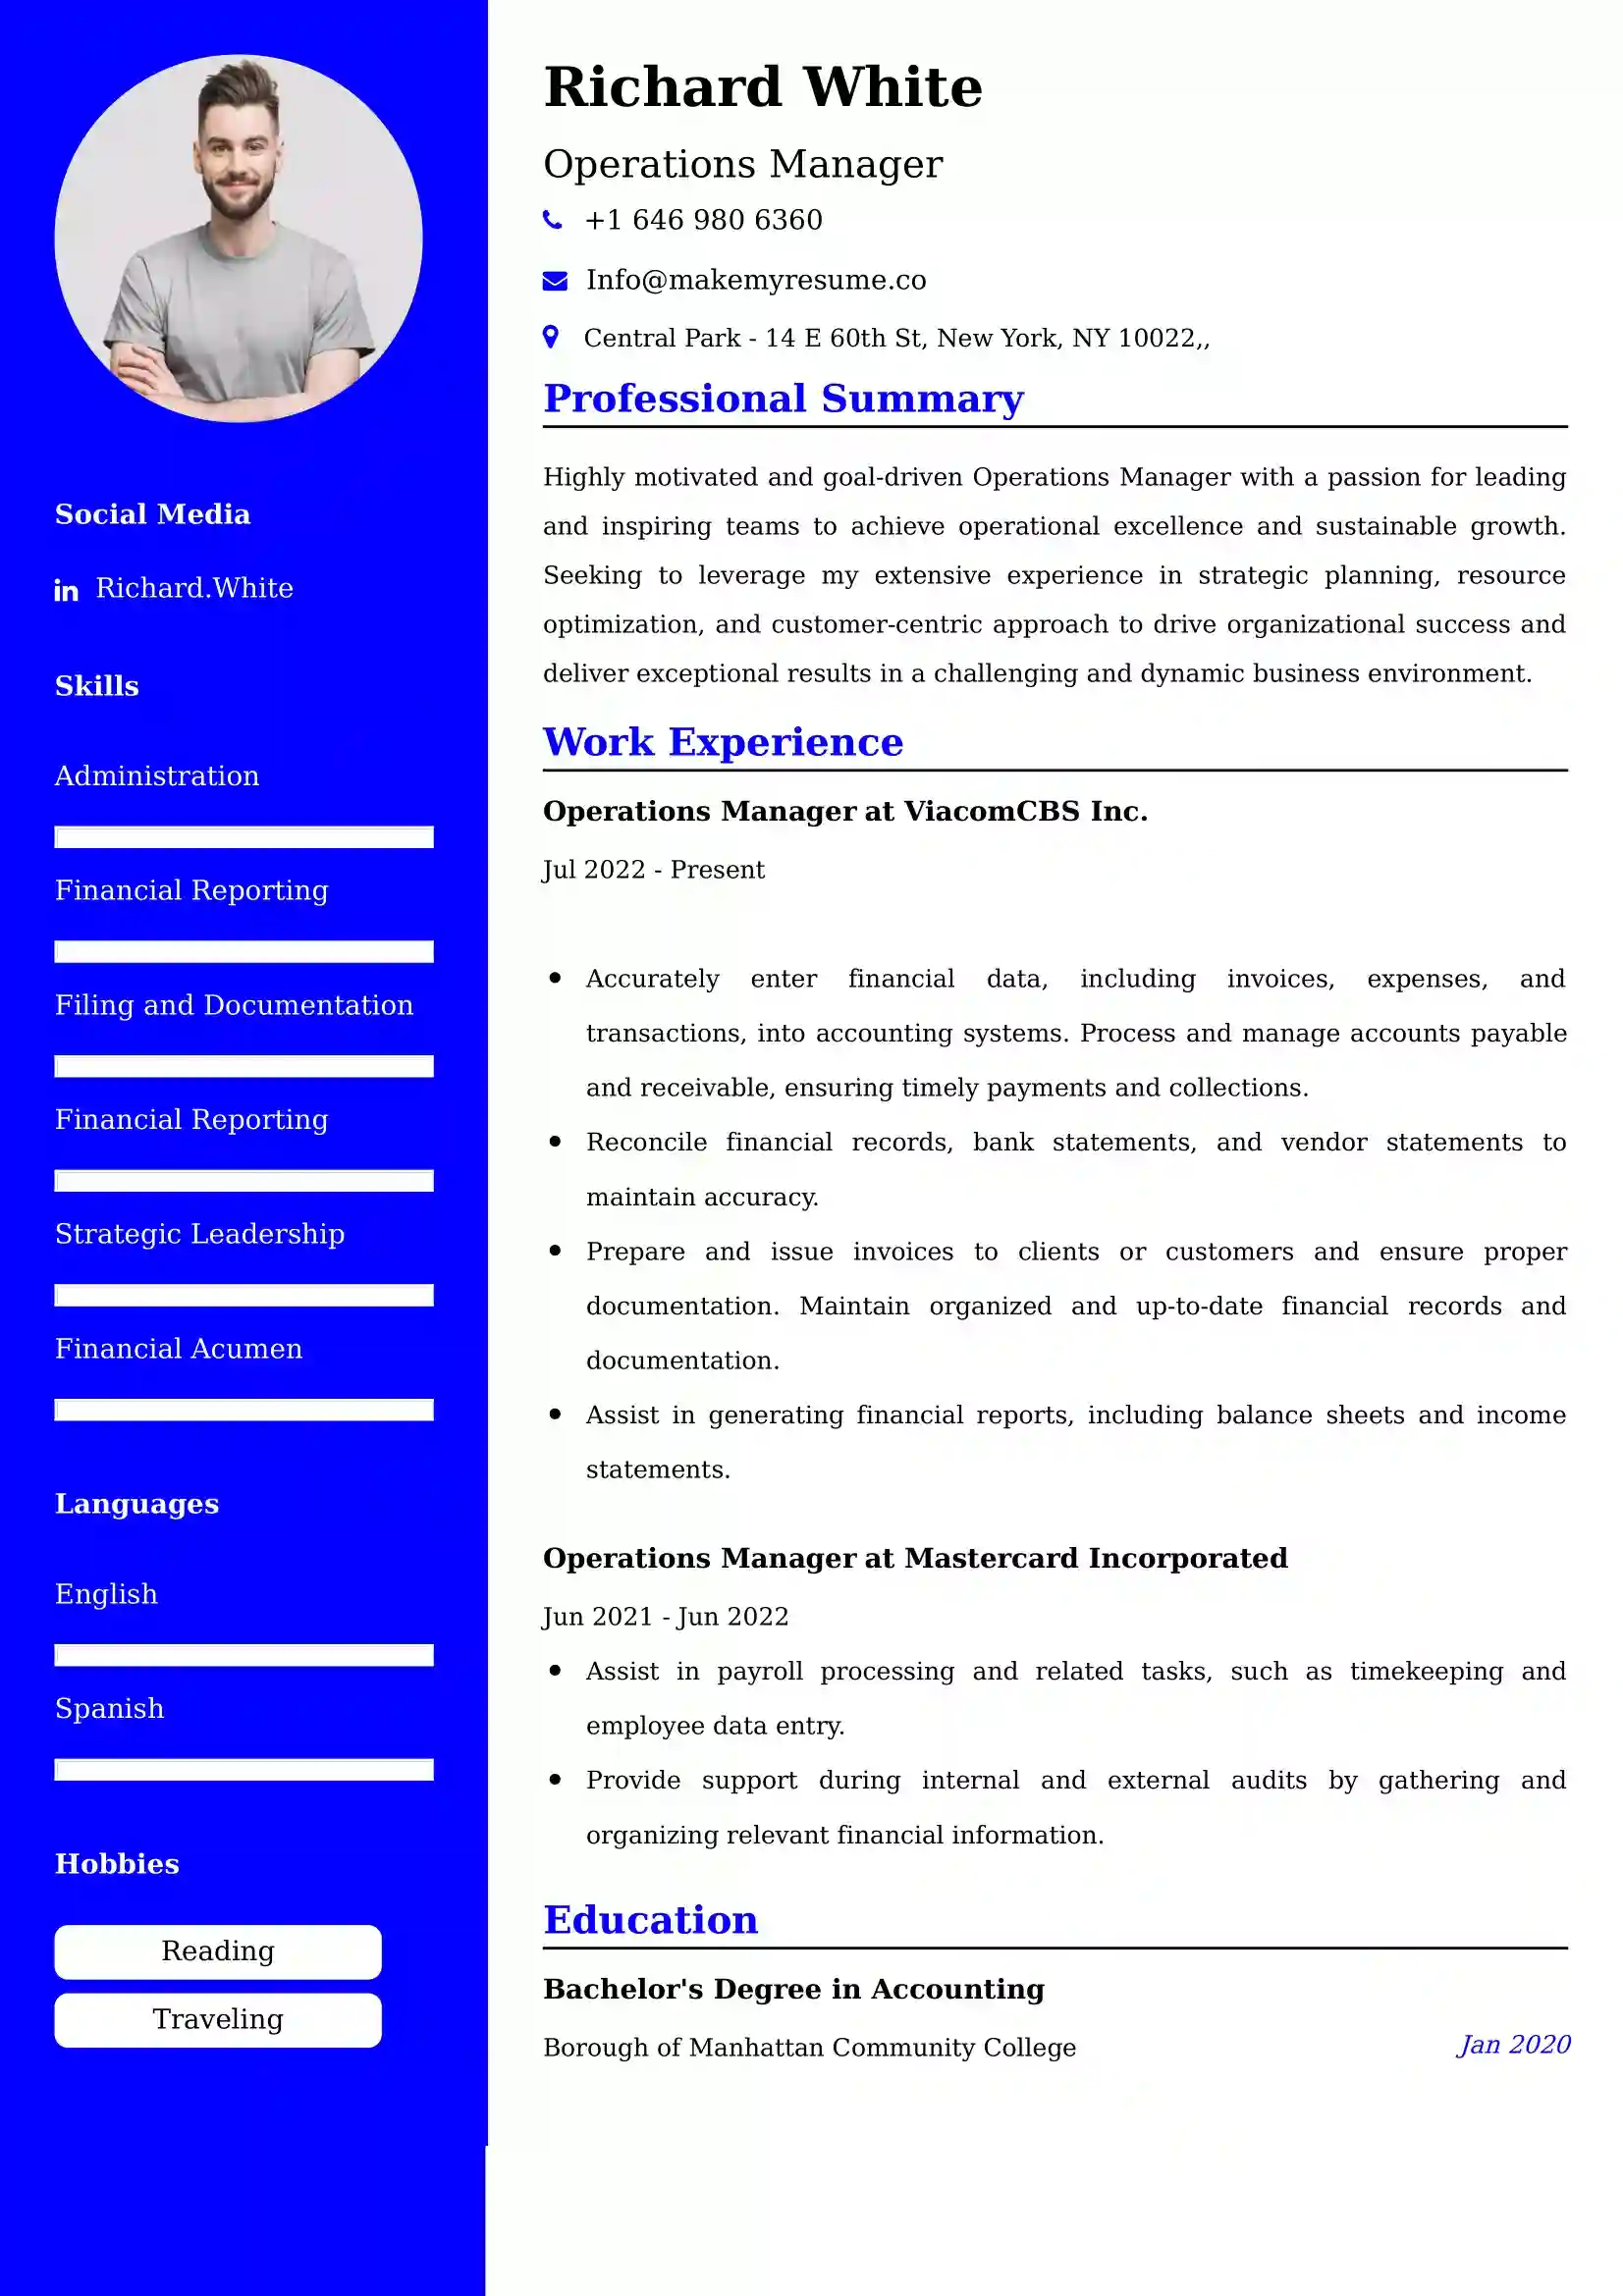 Operations Manager Resume Examples - UK Format, Latest Template.